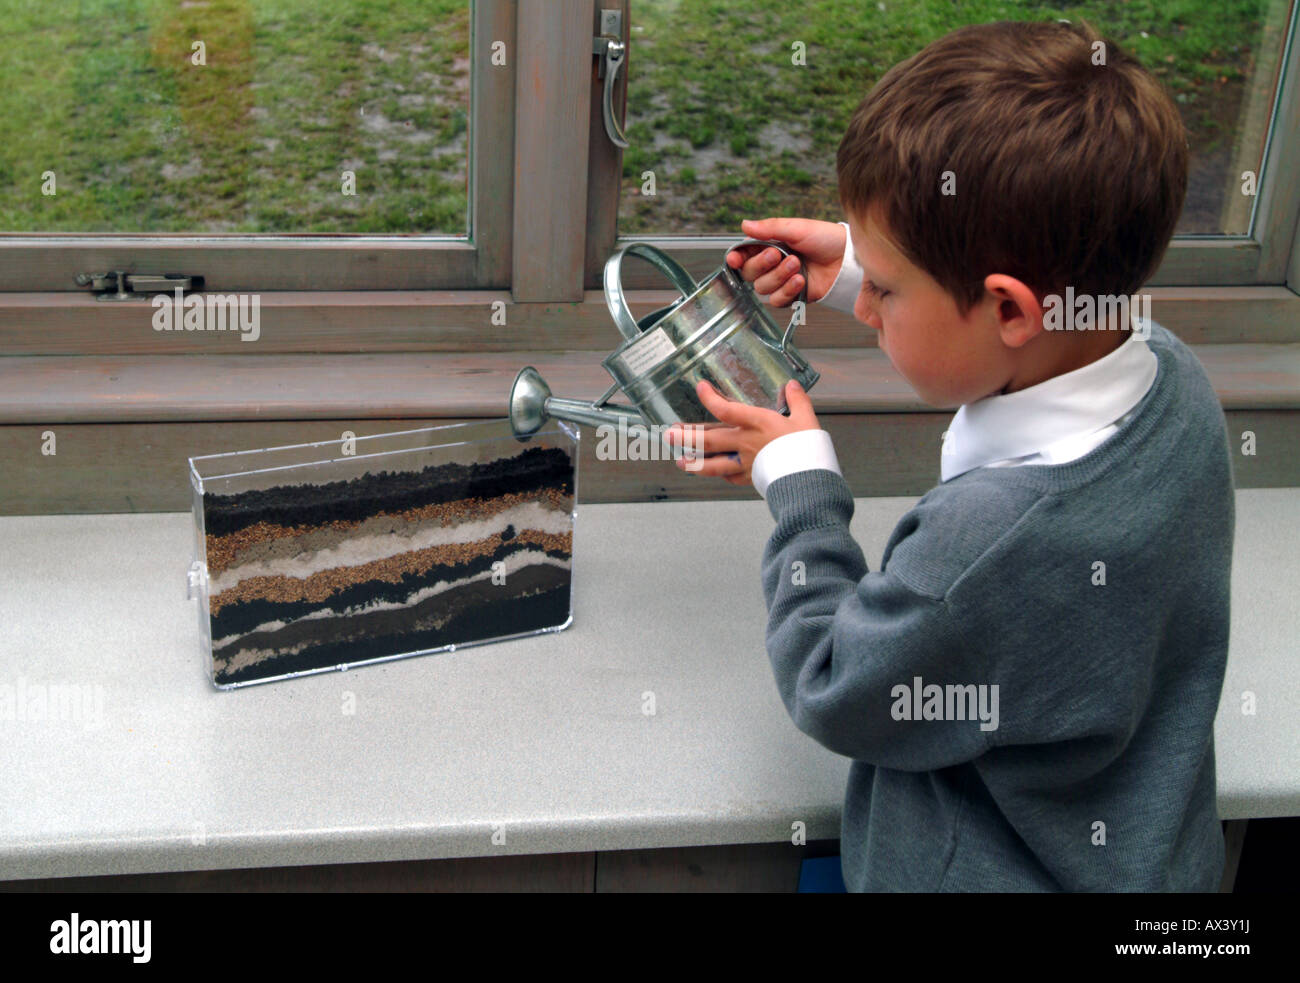 A primary school pupil  adding water to a wormery using a watering can Stock Photo